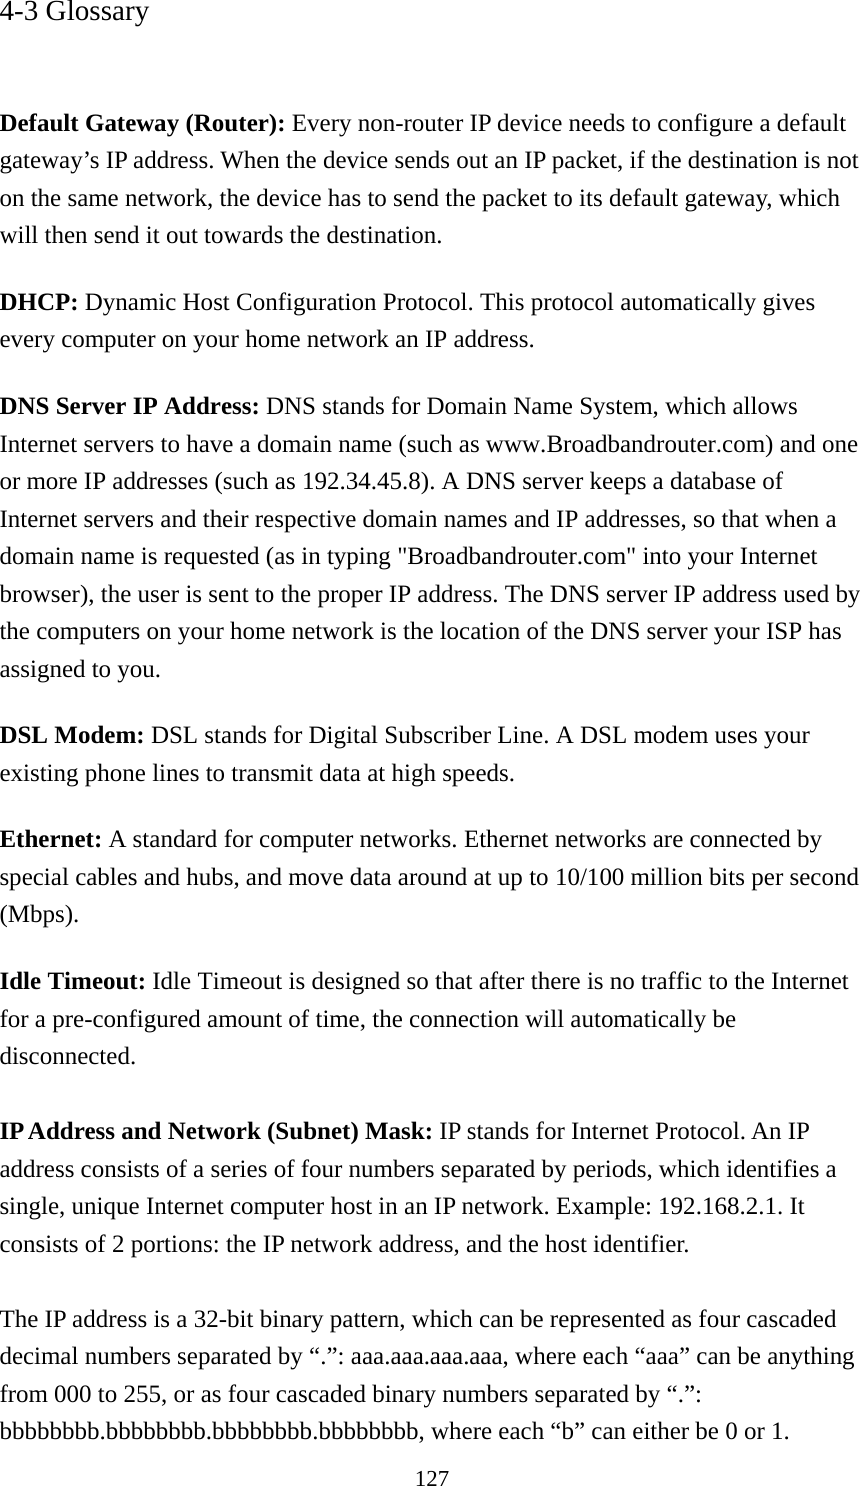 127 4-3 Glossary   Default Gateway (Router): Every non-router IP device needs to configure a default gateway’s IP address. When the device sends out an IP packet, if the destination is not on the same network, the device has to send the packet to its default gateway, which will then send it out towards the destination. DHCP: Dynamic Host Configuration Protocol. This protocol automatically gives every computer on your home network an IP address. DNS Server IP Address: DNS stands for Domain Name System, which allows Internet servers to have a domain name (such as www.Broadbandrouter.com) and one or more IP addresses (such as 192.34.45.8). A DNS server keeps a database of Internet servers and their respective domain names and IP addresses, so that when a domain name is requested (as in typing &quot;Broadbandrouter.com&quot; into your Internet browser), the user is sent to the proper IP address. The DNS server IP address used by the computers on your home network is the location of the DNS server your ISP has assigned to you.   DSL Modem: DSL stands for Digital Subscriber Line. A DSL modem uses your existing phone lines to transmit data at high speeds.   Ethernet: A standard for computer networks. Ethernet networks are connected by special cables and hubs, and move data around at up to 10/100 million bits per second (Mbps).  Idle Timeout: Idle Timeout is designed so that after there is no traffic to the Internet for a pre-configured amount of time, the connection will automatically be disconnected.  IP Address and Network (Subnet) Mask: IP stands for Internet Protocol. An IP address consists of a series of four numbers separated by periods, which identifies a single, unique Internet computer host in an IP network. Example: 192.168.2.1. It consists of 2 portions: the IP network address, and the host identifier.  The IP address is a 32-bit binary pattern, which can be represented as four cascaded decimal numbers separated by “.”: aaa.aaa.aaa.aaa, where each “aaa” can be anything from 000 to 255, or as four cascaded binary numbers separated by “.”: bbbbbbbb.bbbbbbbb.bbbbbbbb.bbbbbbbb, where each “b” can either be 0 or 1. 